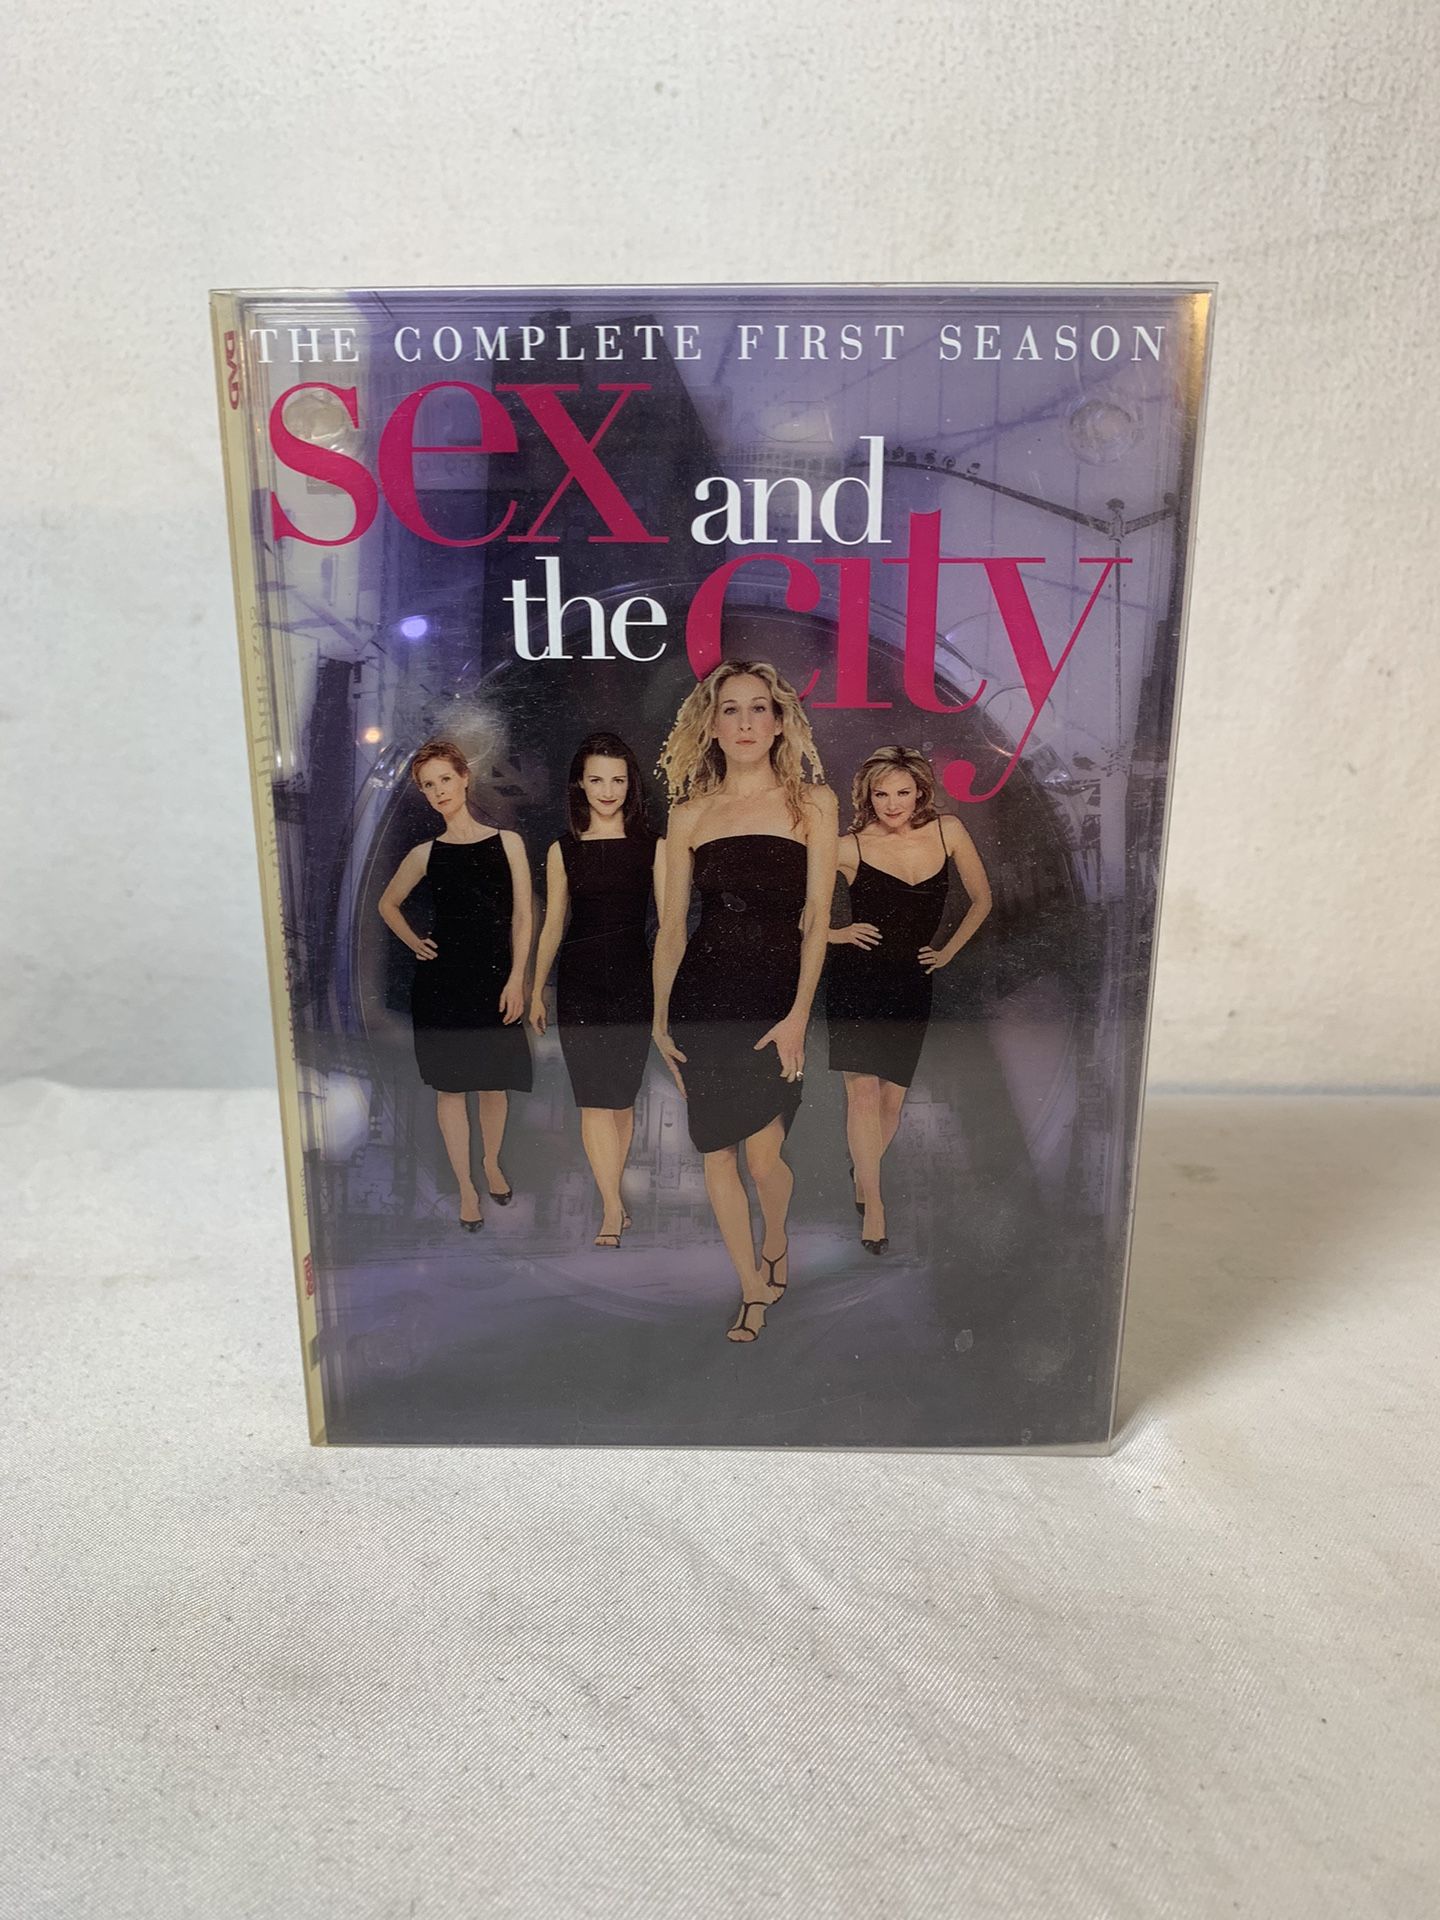 Sex and the City: The Complete First Season (DVD, 2000, 3-Disc Set)